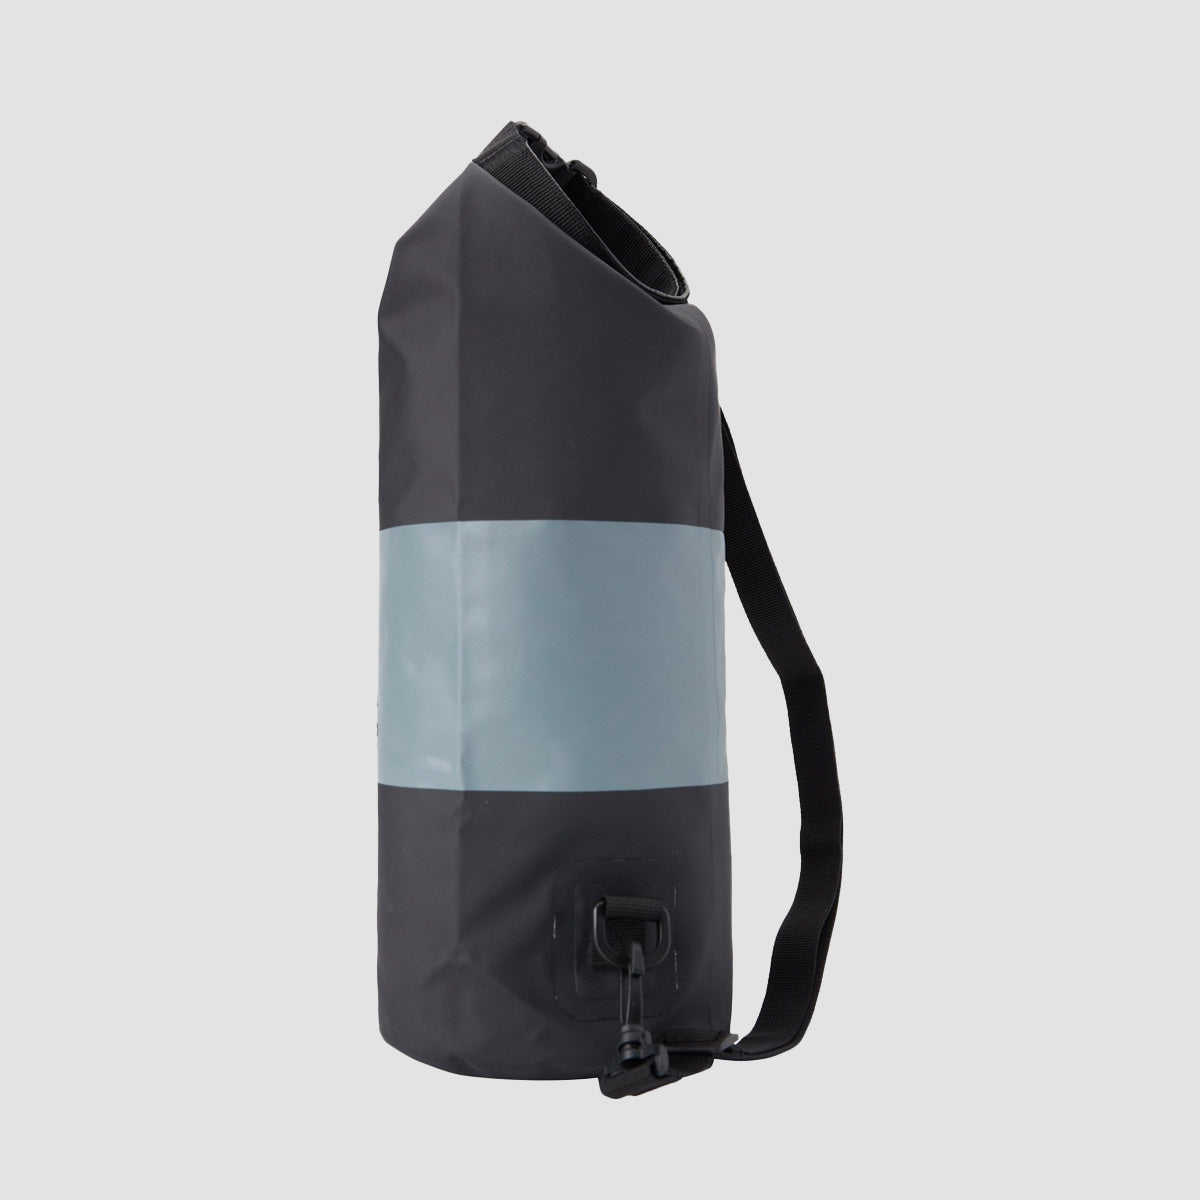 Quiksilver Small Water Stash 5L Roll Top Pack Black